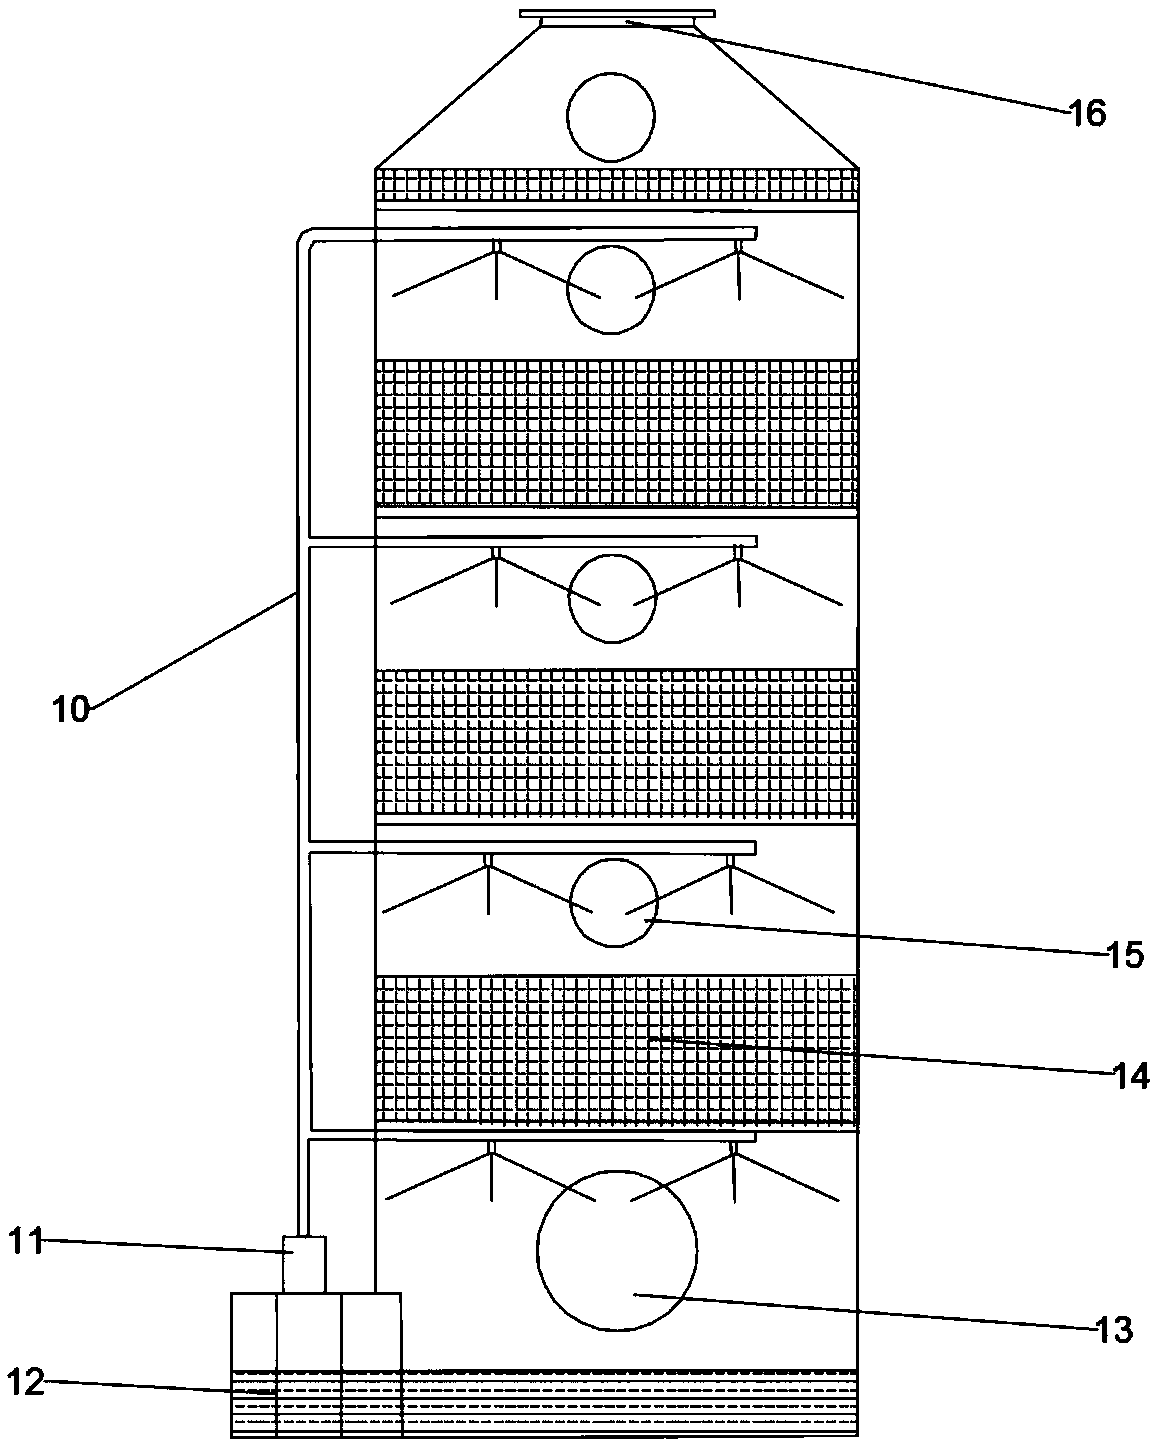 Method for extracting tungsten carbide and cobalt from waste hard alloy